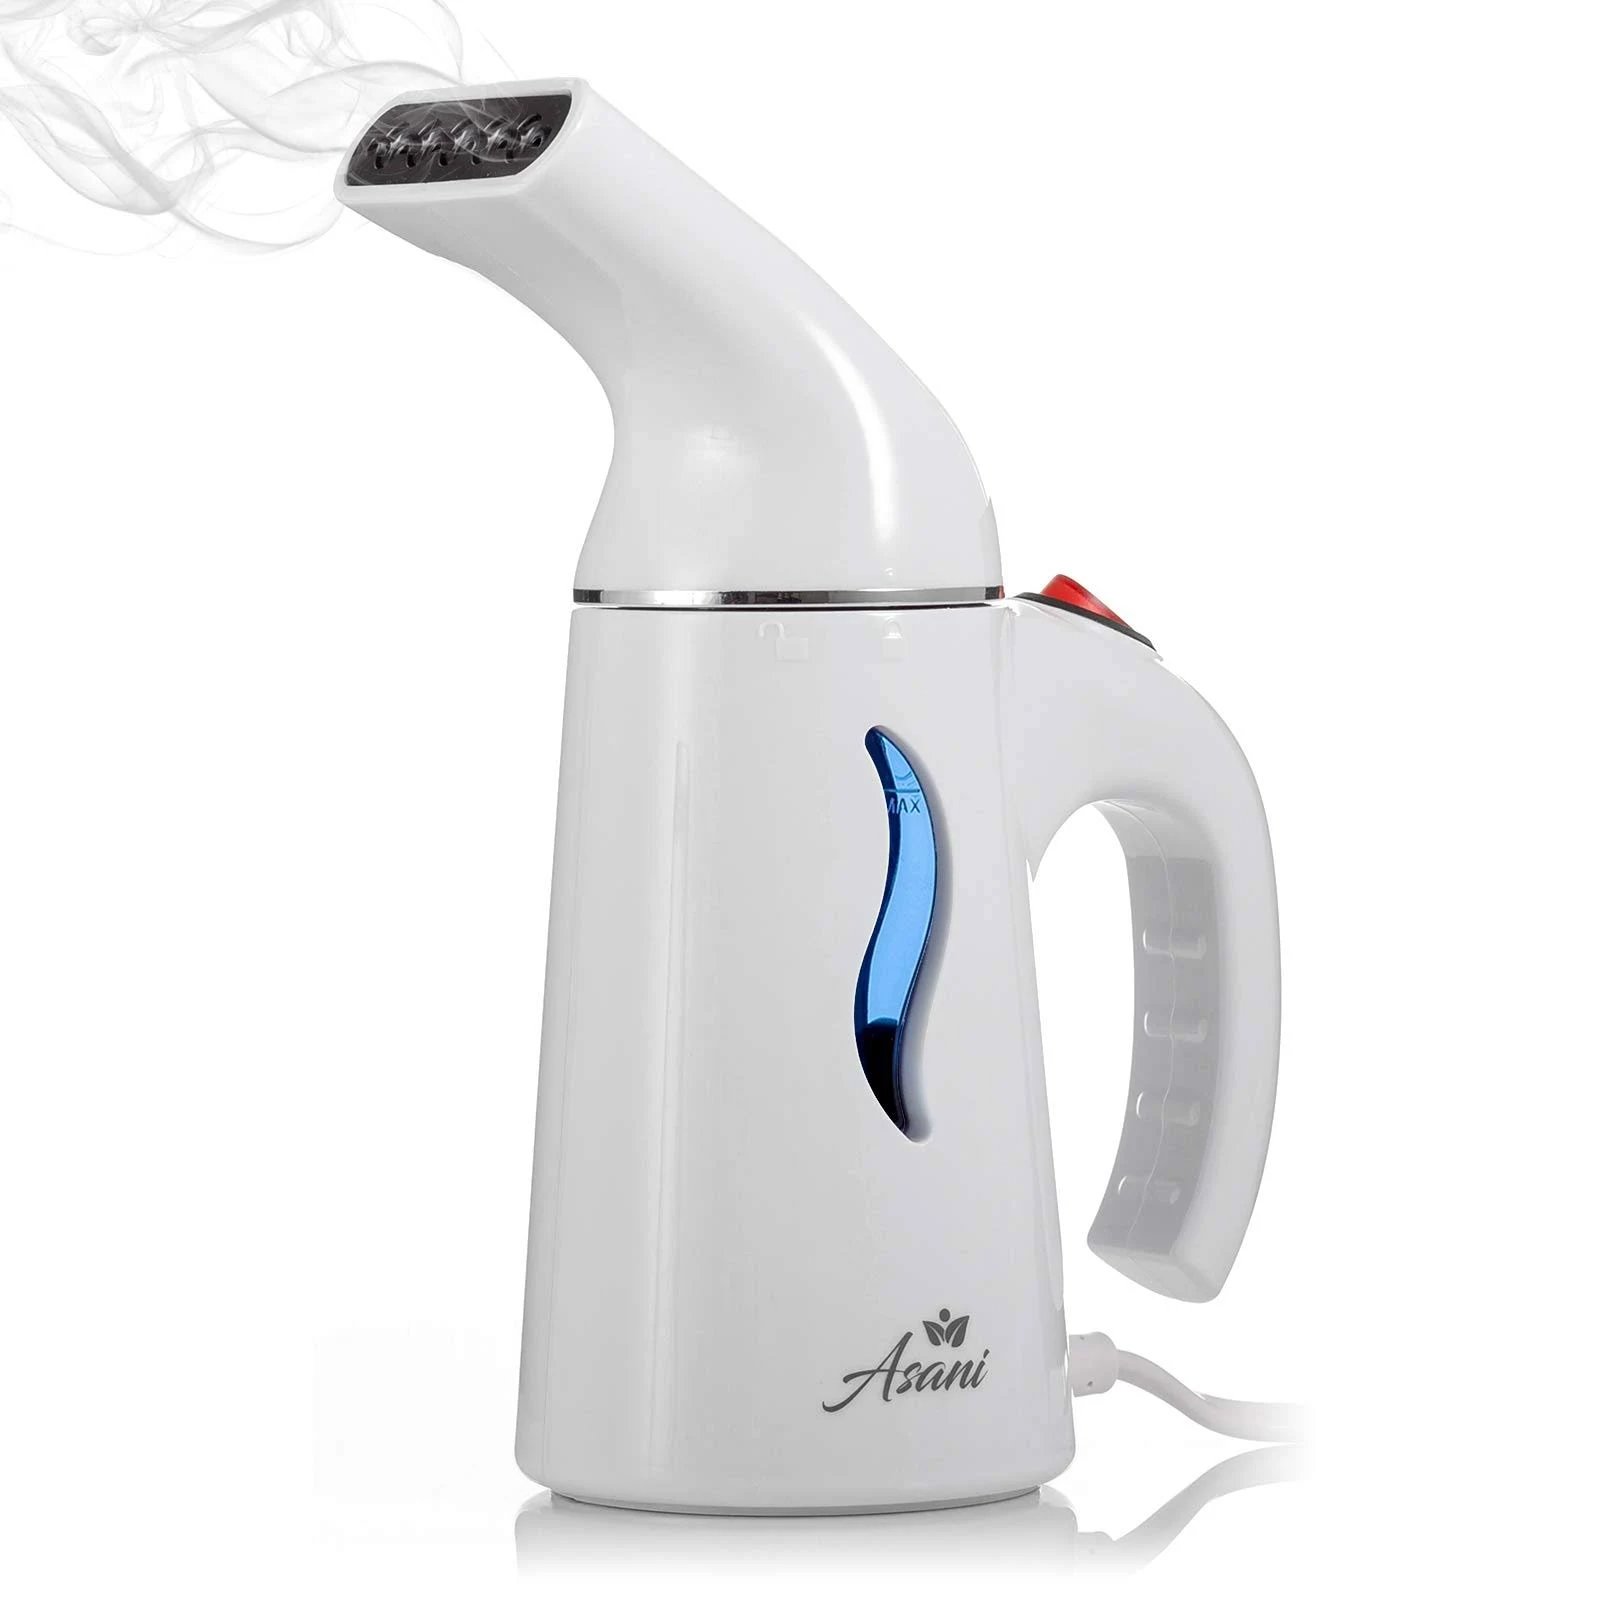 Asani Handheld Steamer for Clothes